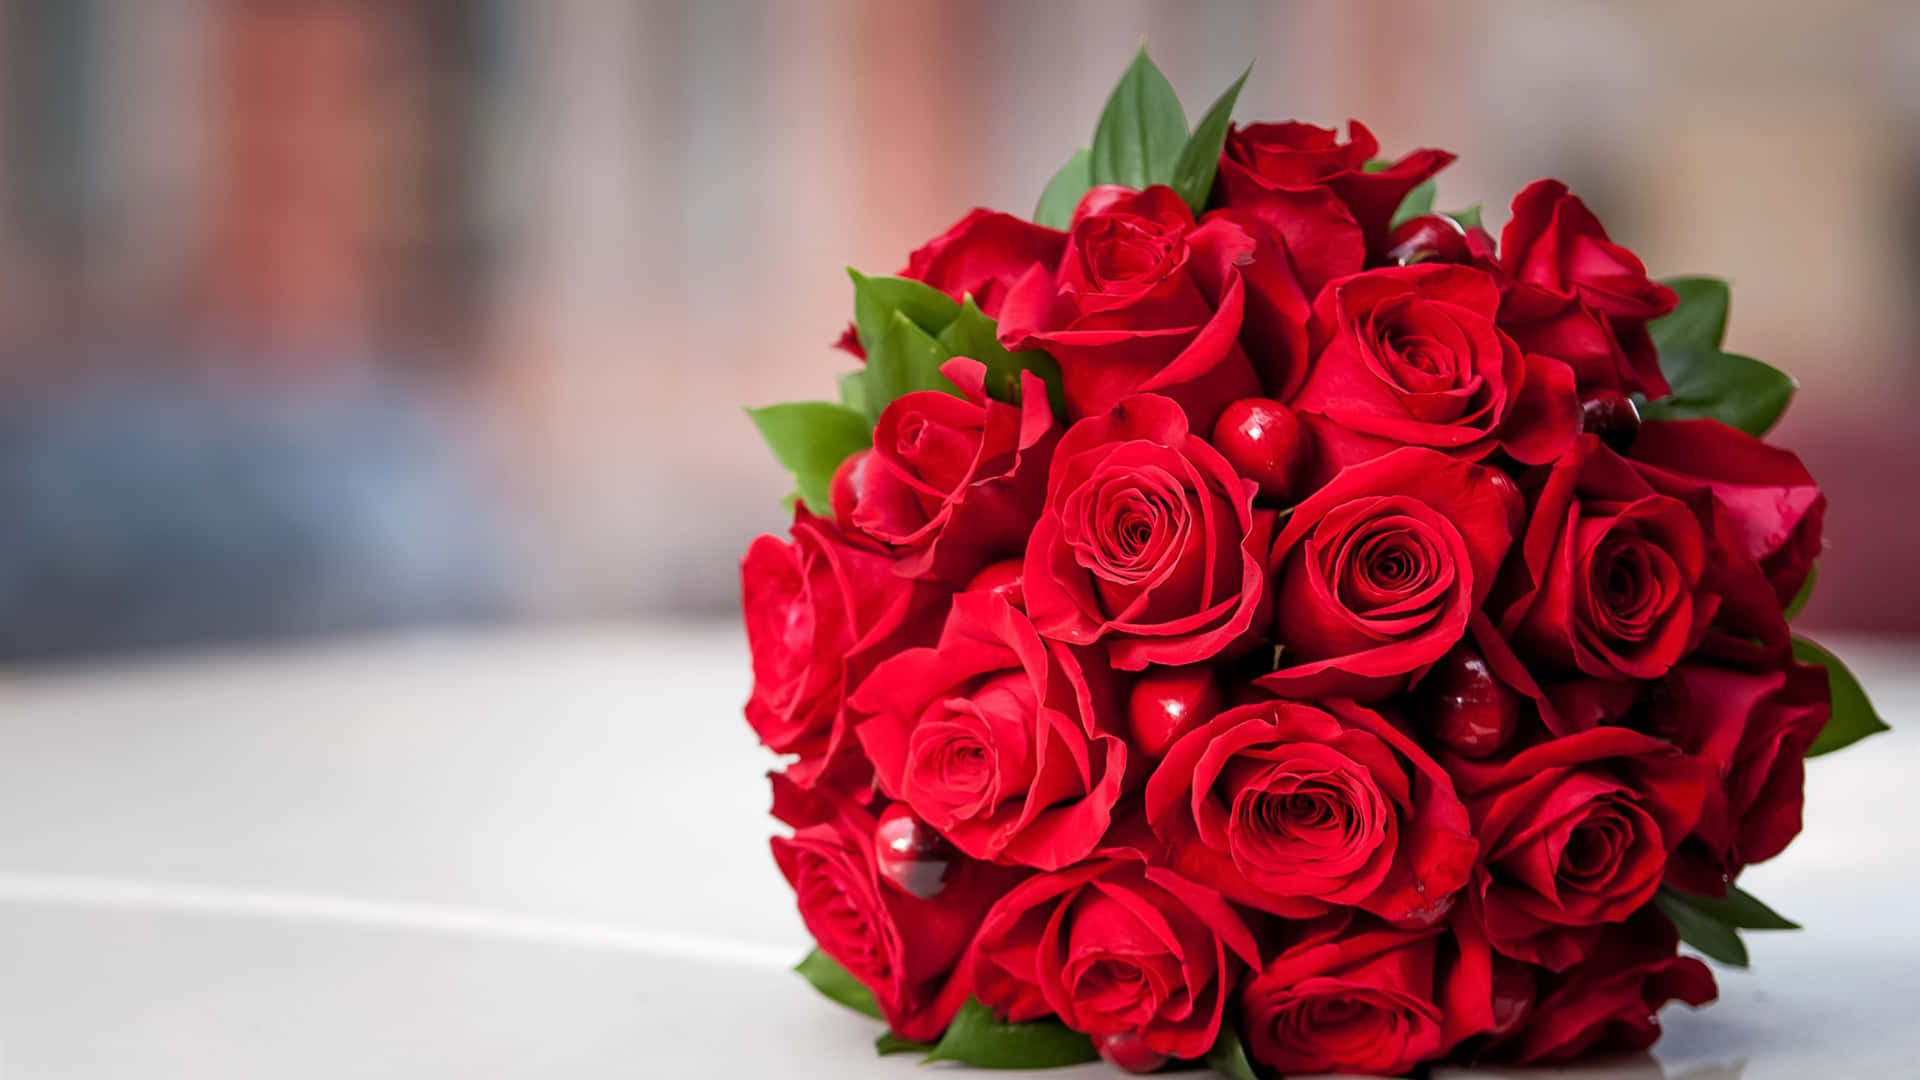 Red Rose Bouquet With Red Balls Decoration Wallpaper